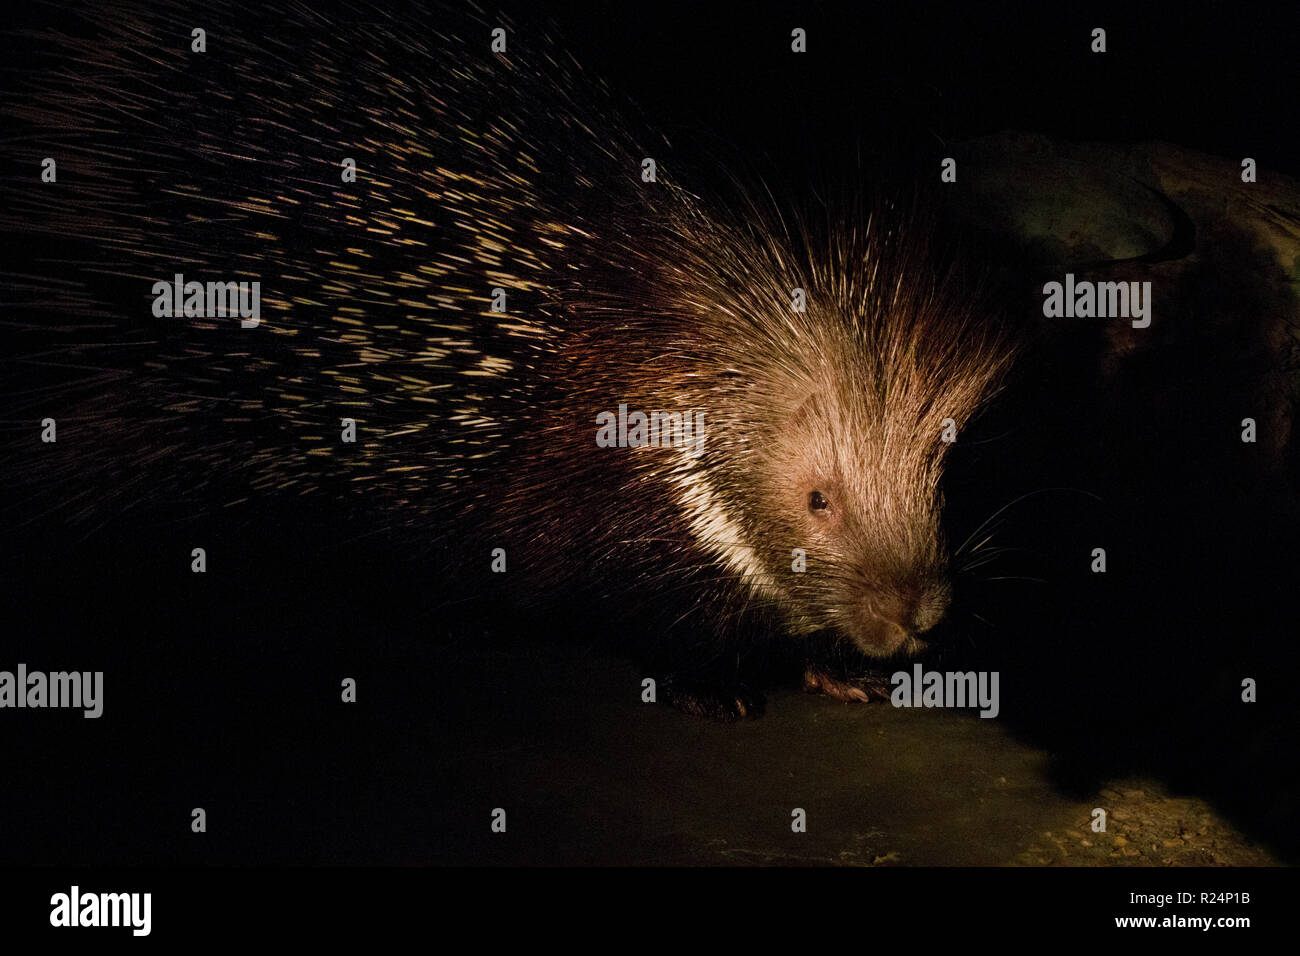 Indian crested porcupine (Hystrix indica) Stock Photo